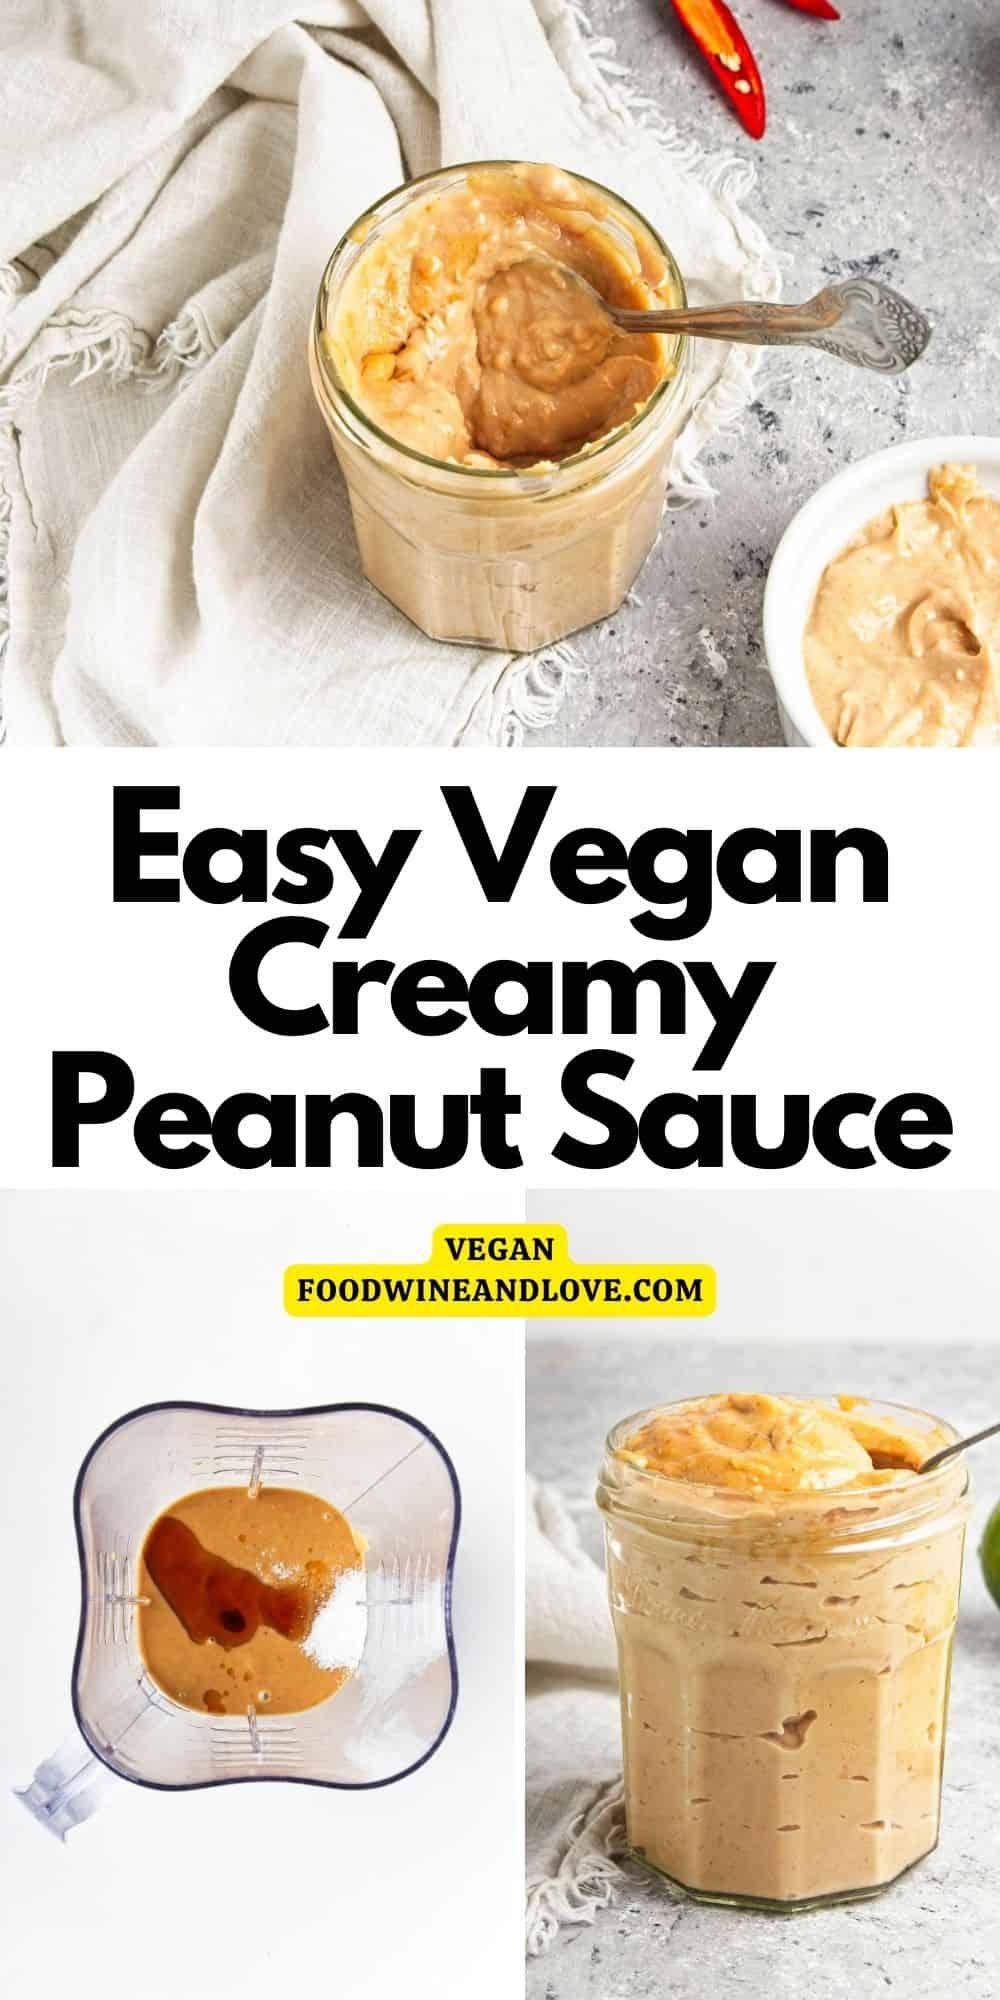 Vegan Creamy Peanut Sauce, a simple and delicious recipe for a dip, dressing, or sauce for a favorite dish.